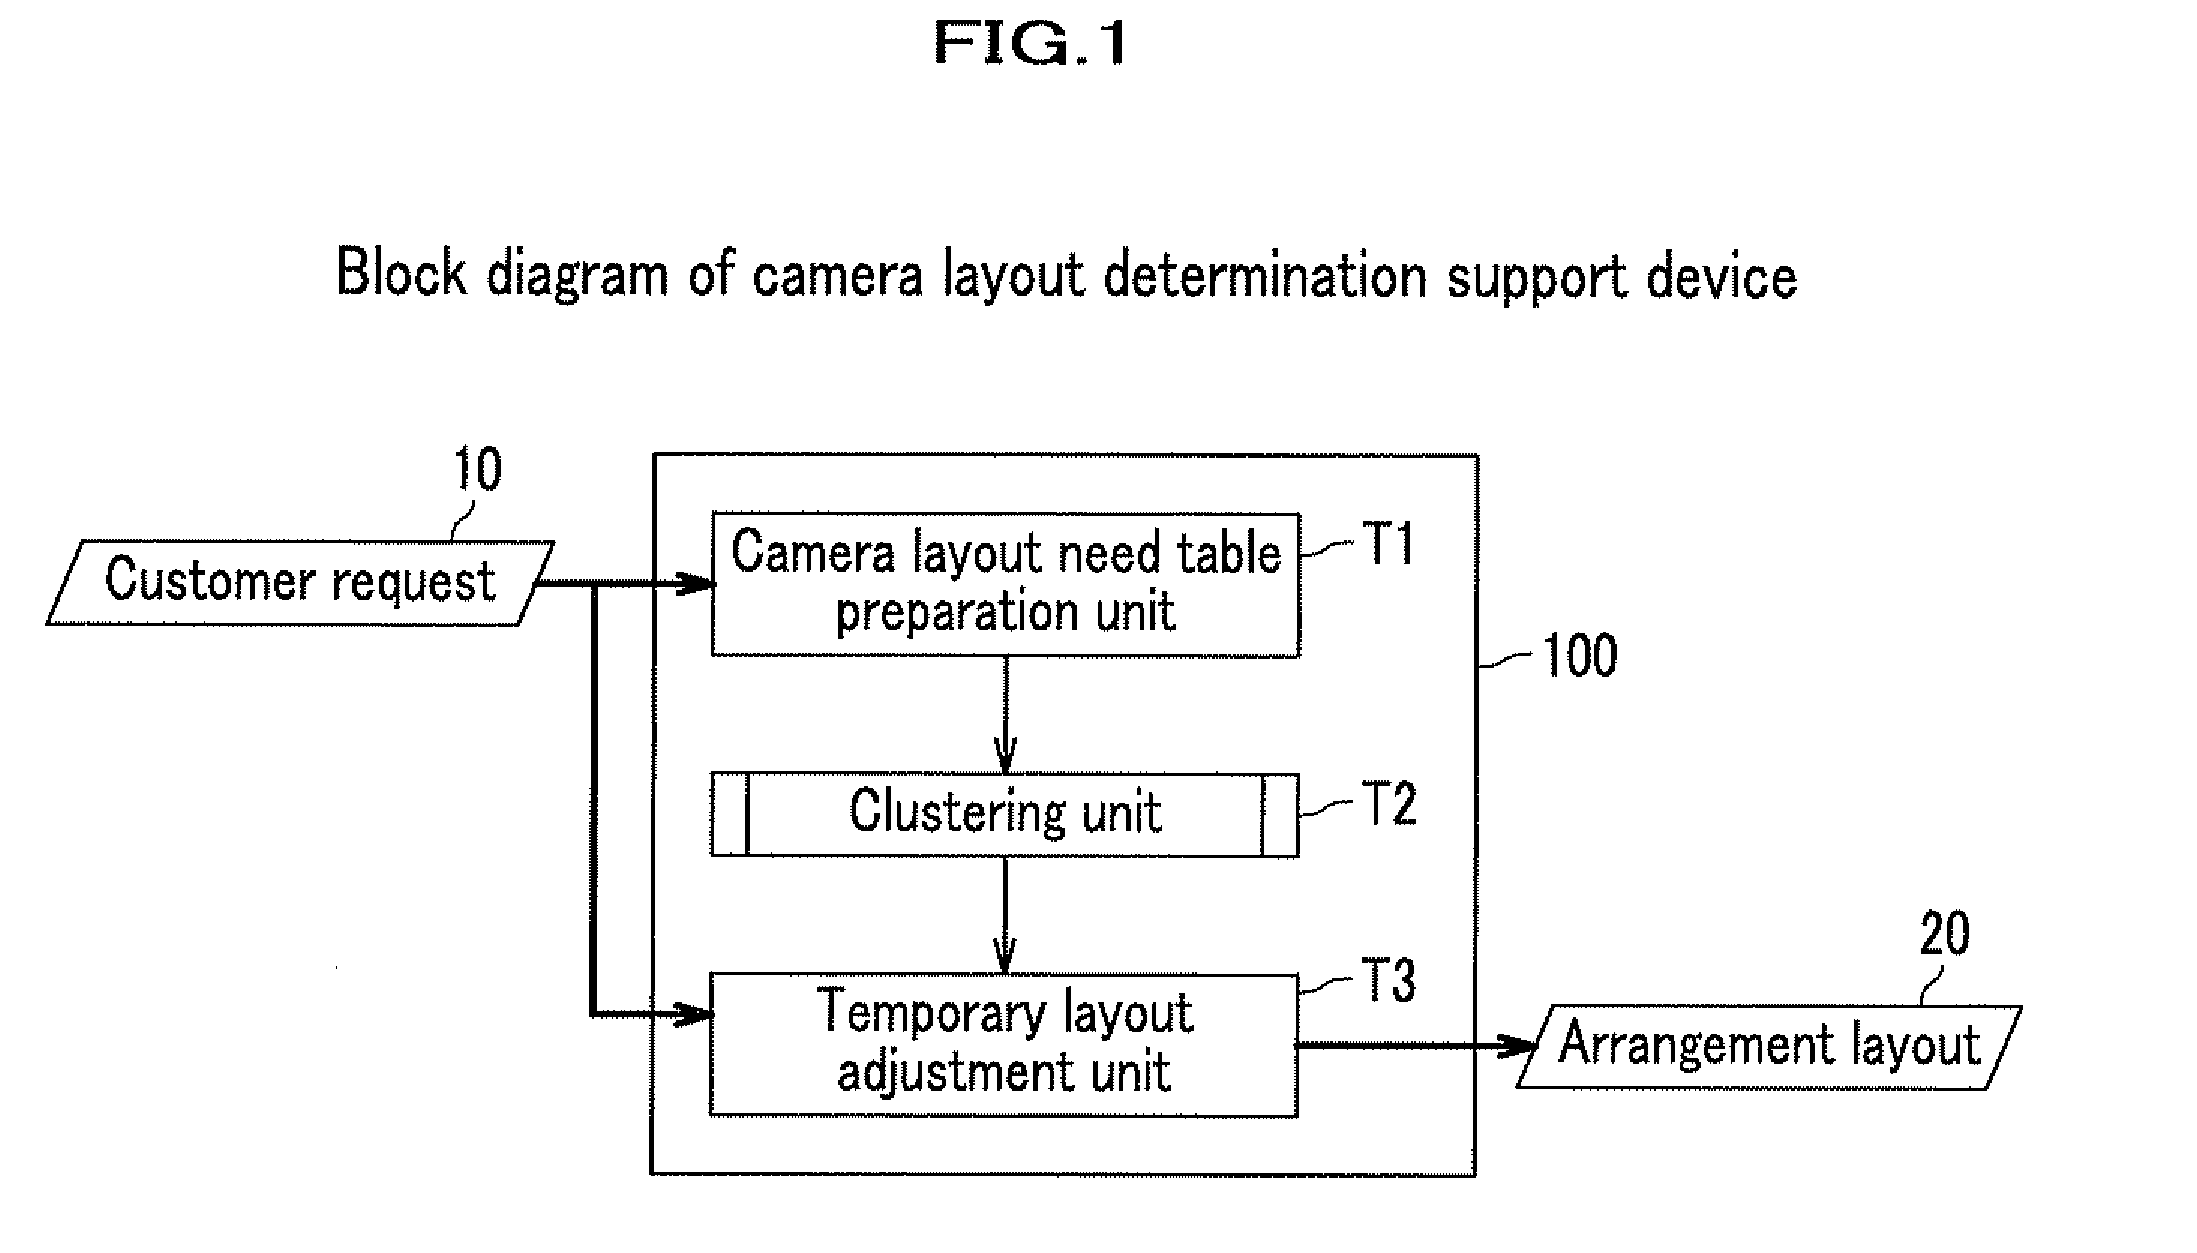 Camera layout determination support device